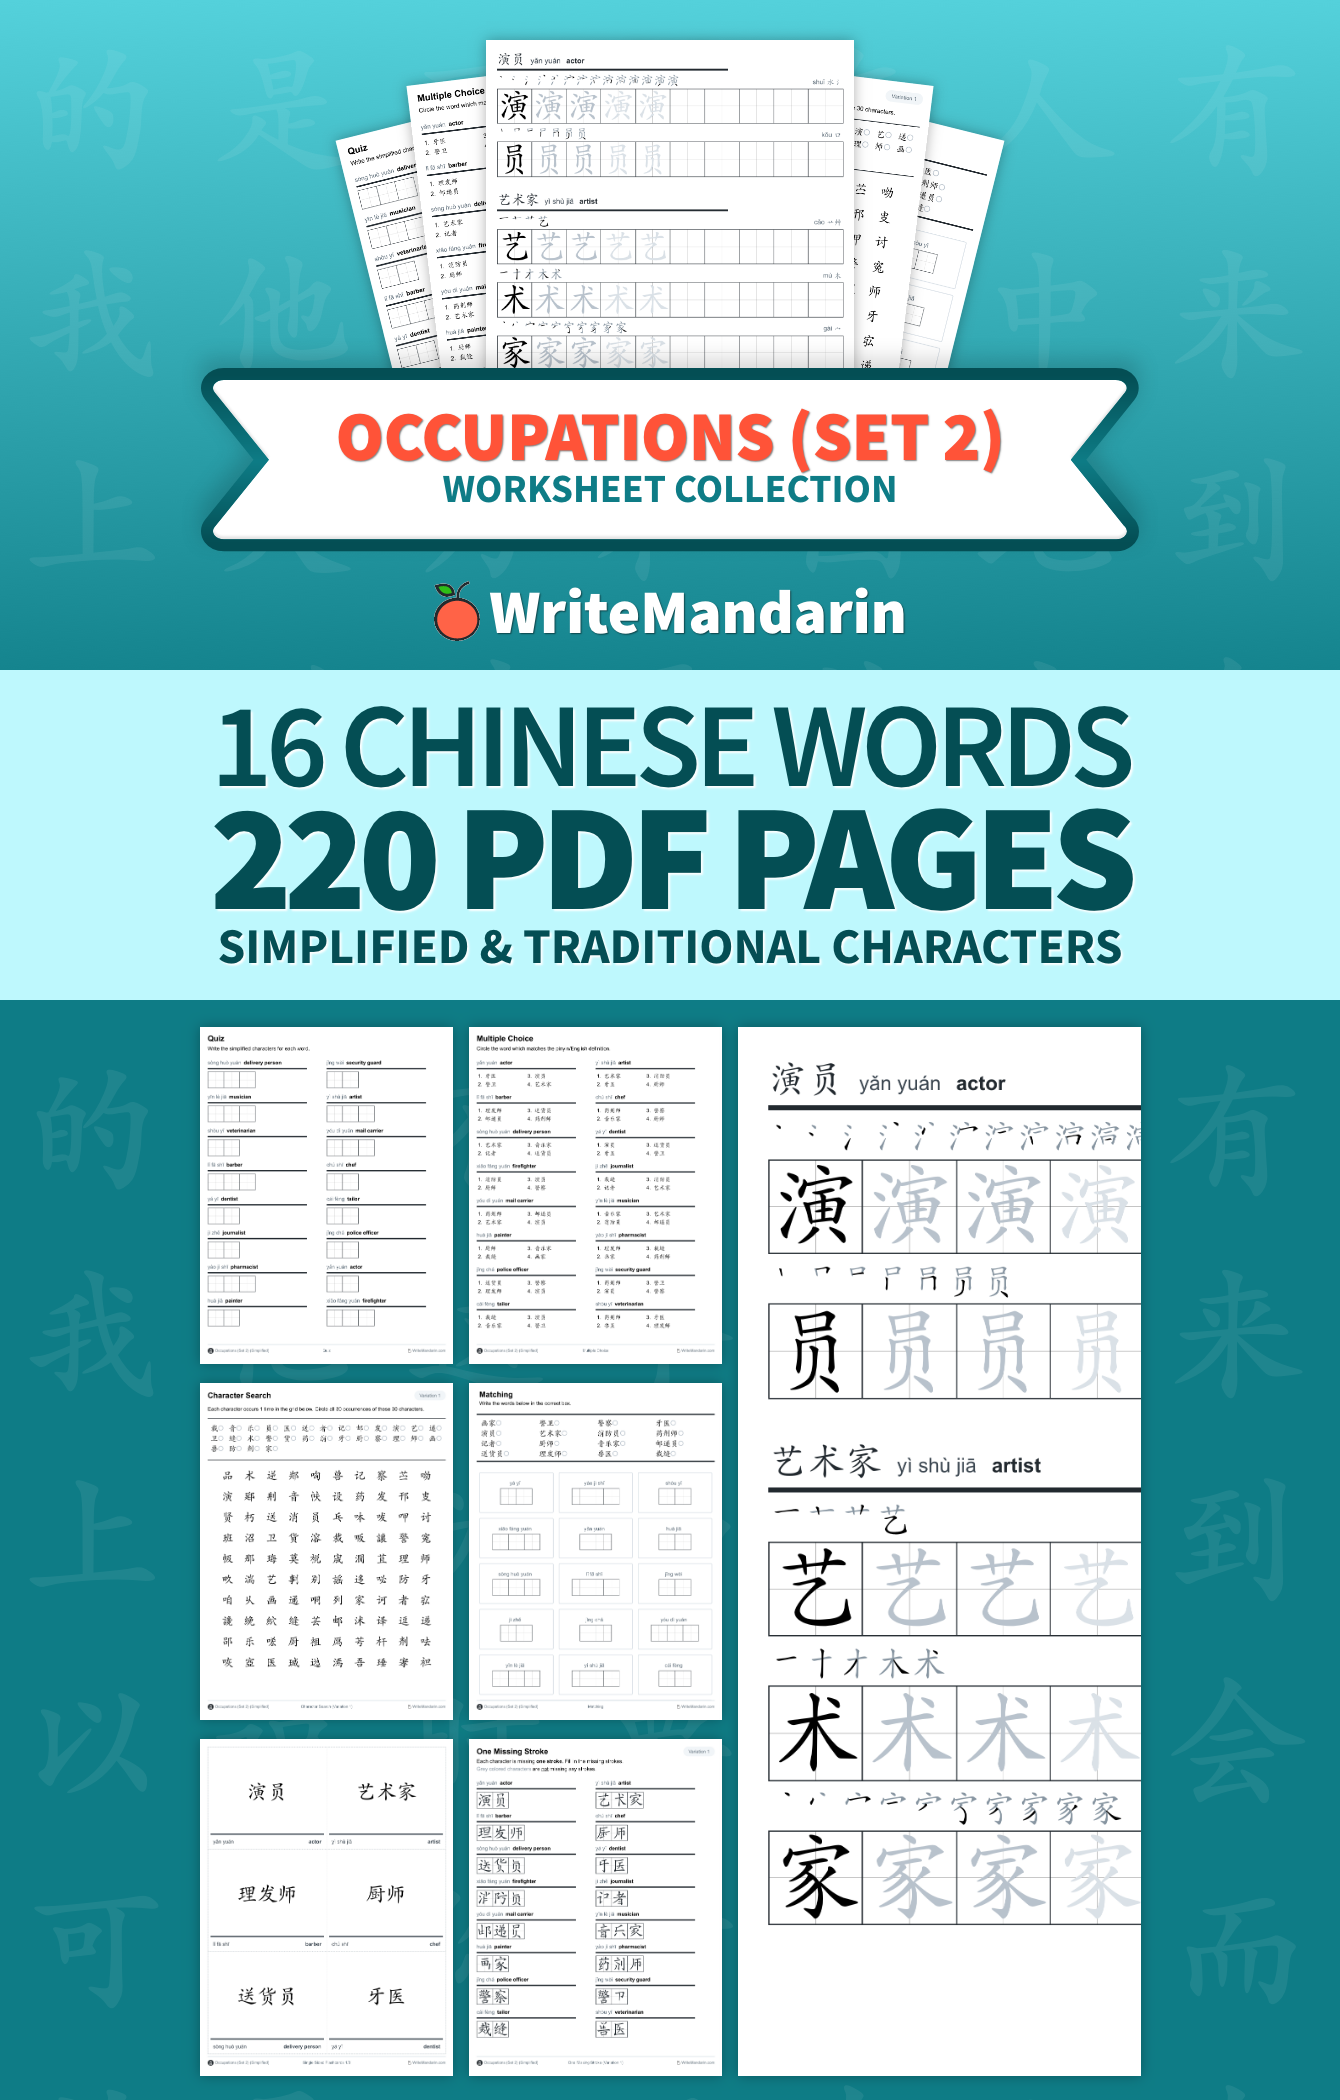 Preview image of Occupations (Set 2) worksheet collection